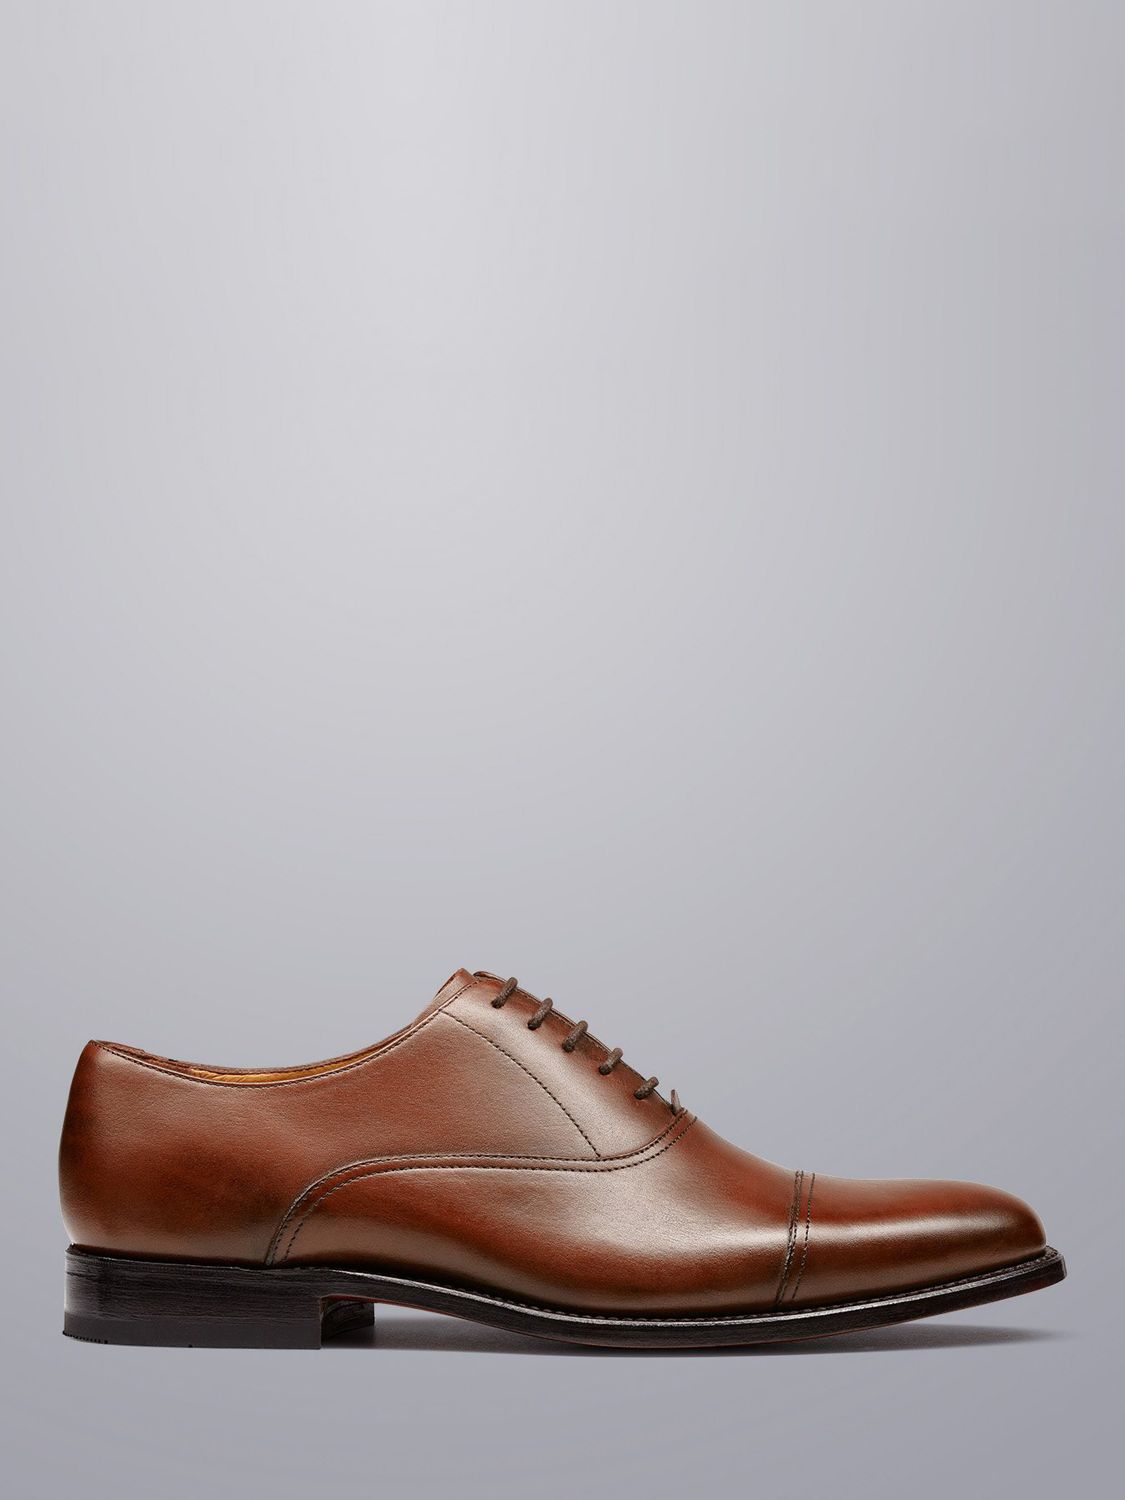 Buy Charles Tyrwhitt Leather Oxford Shoes Online at johnlewis.com